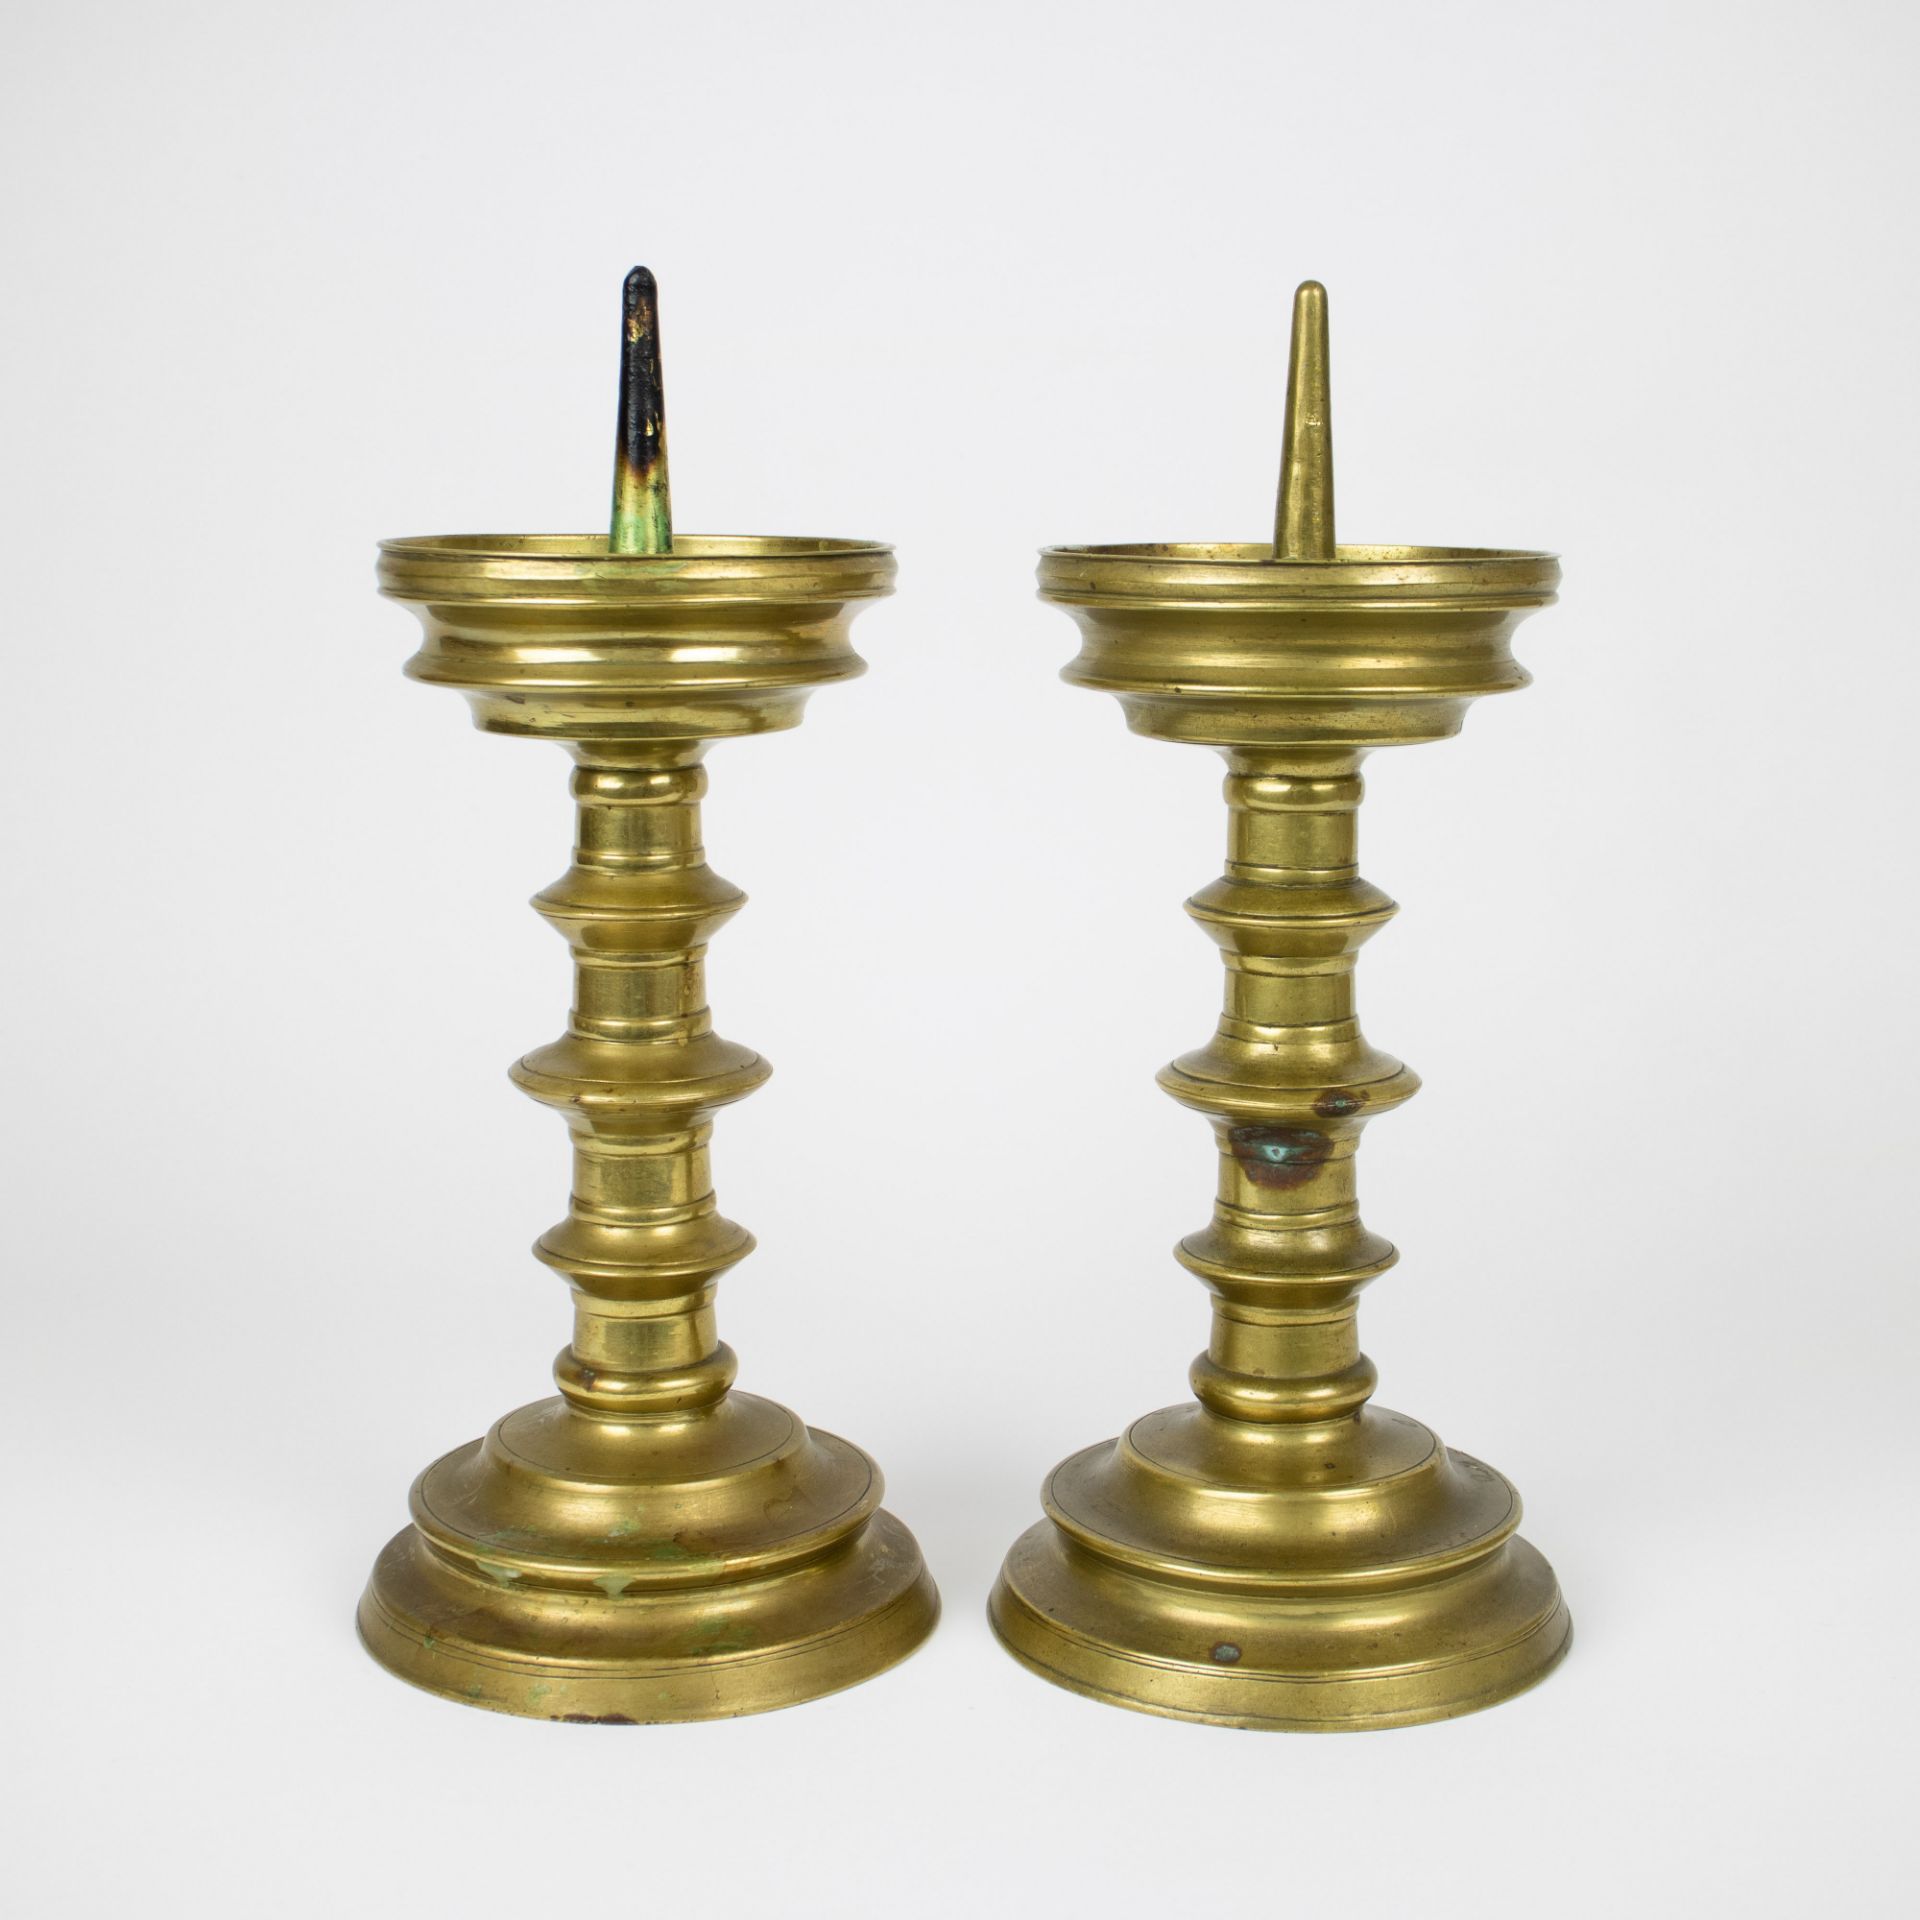 A pair of 19th century candlesticks - Image 4 of 6